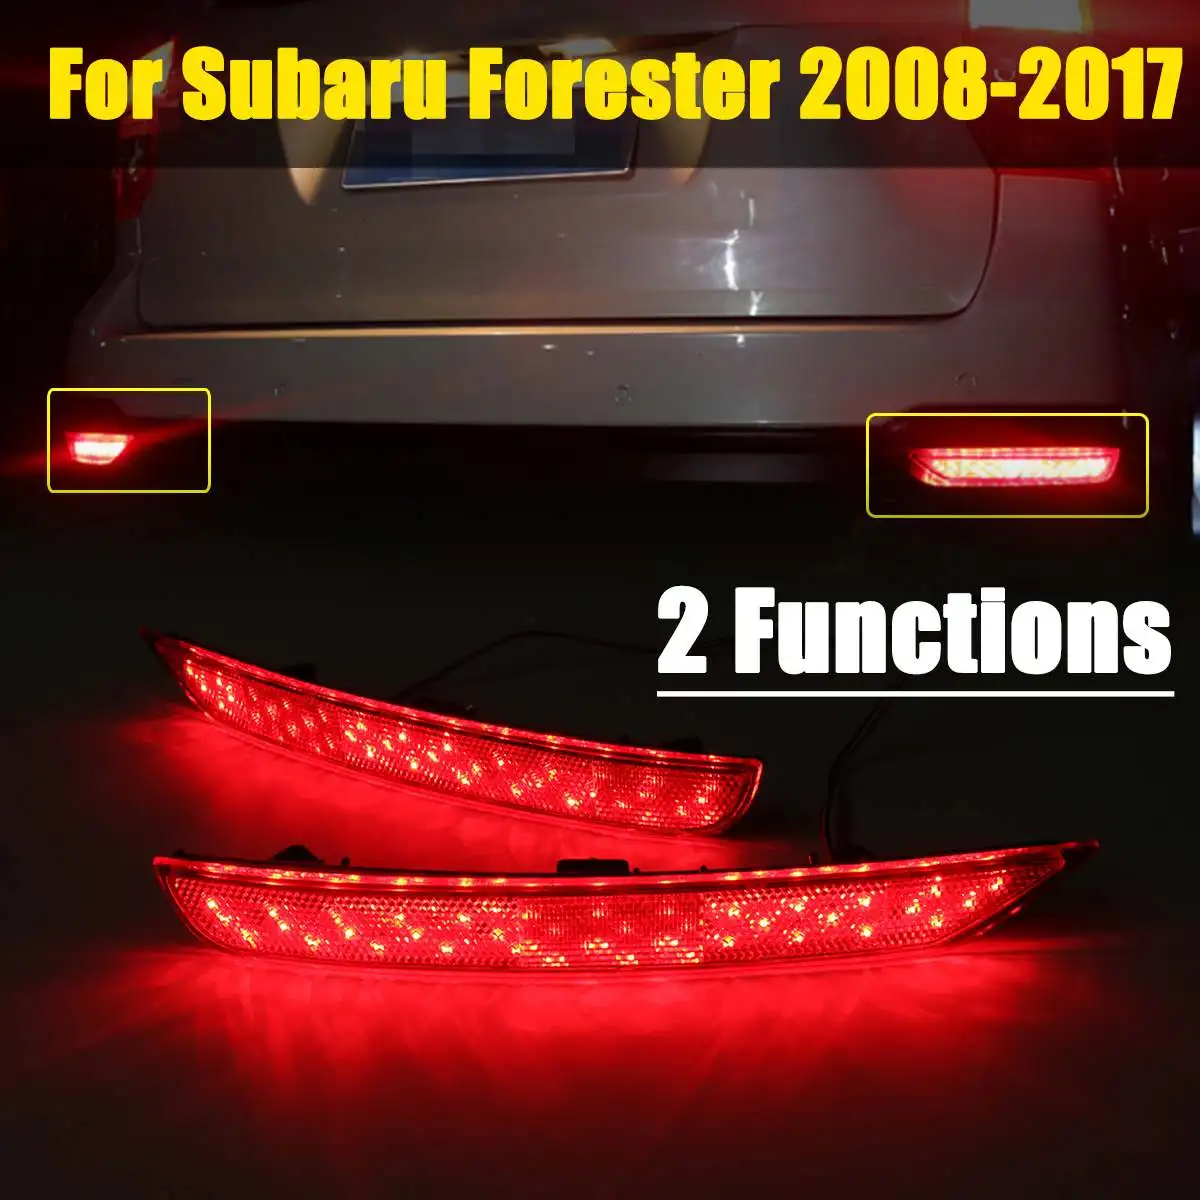 1 Pair LED Rear Bumper Reflector Light Brake DRL Turn Signal Light 3 Functions Tail Lamp For Subaru Forester 2008